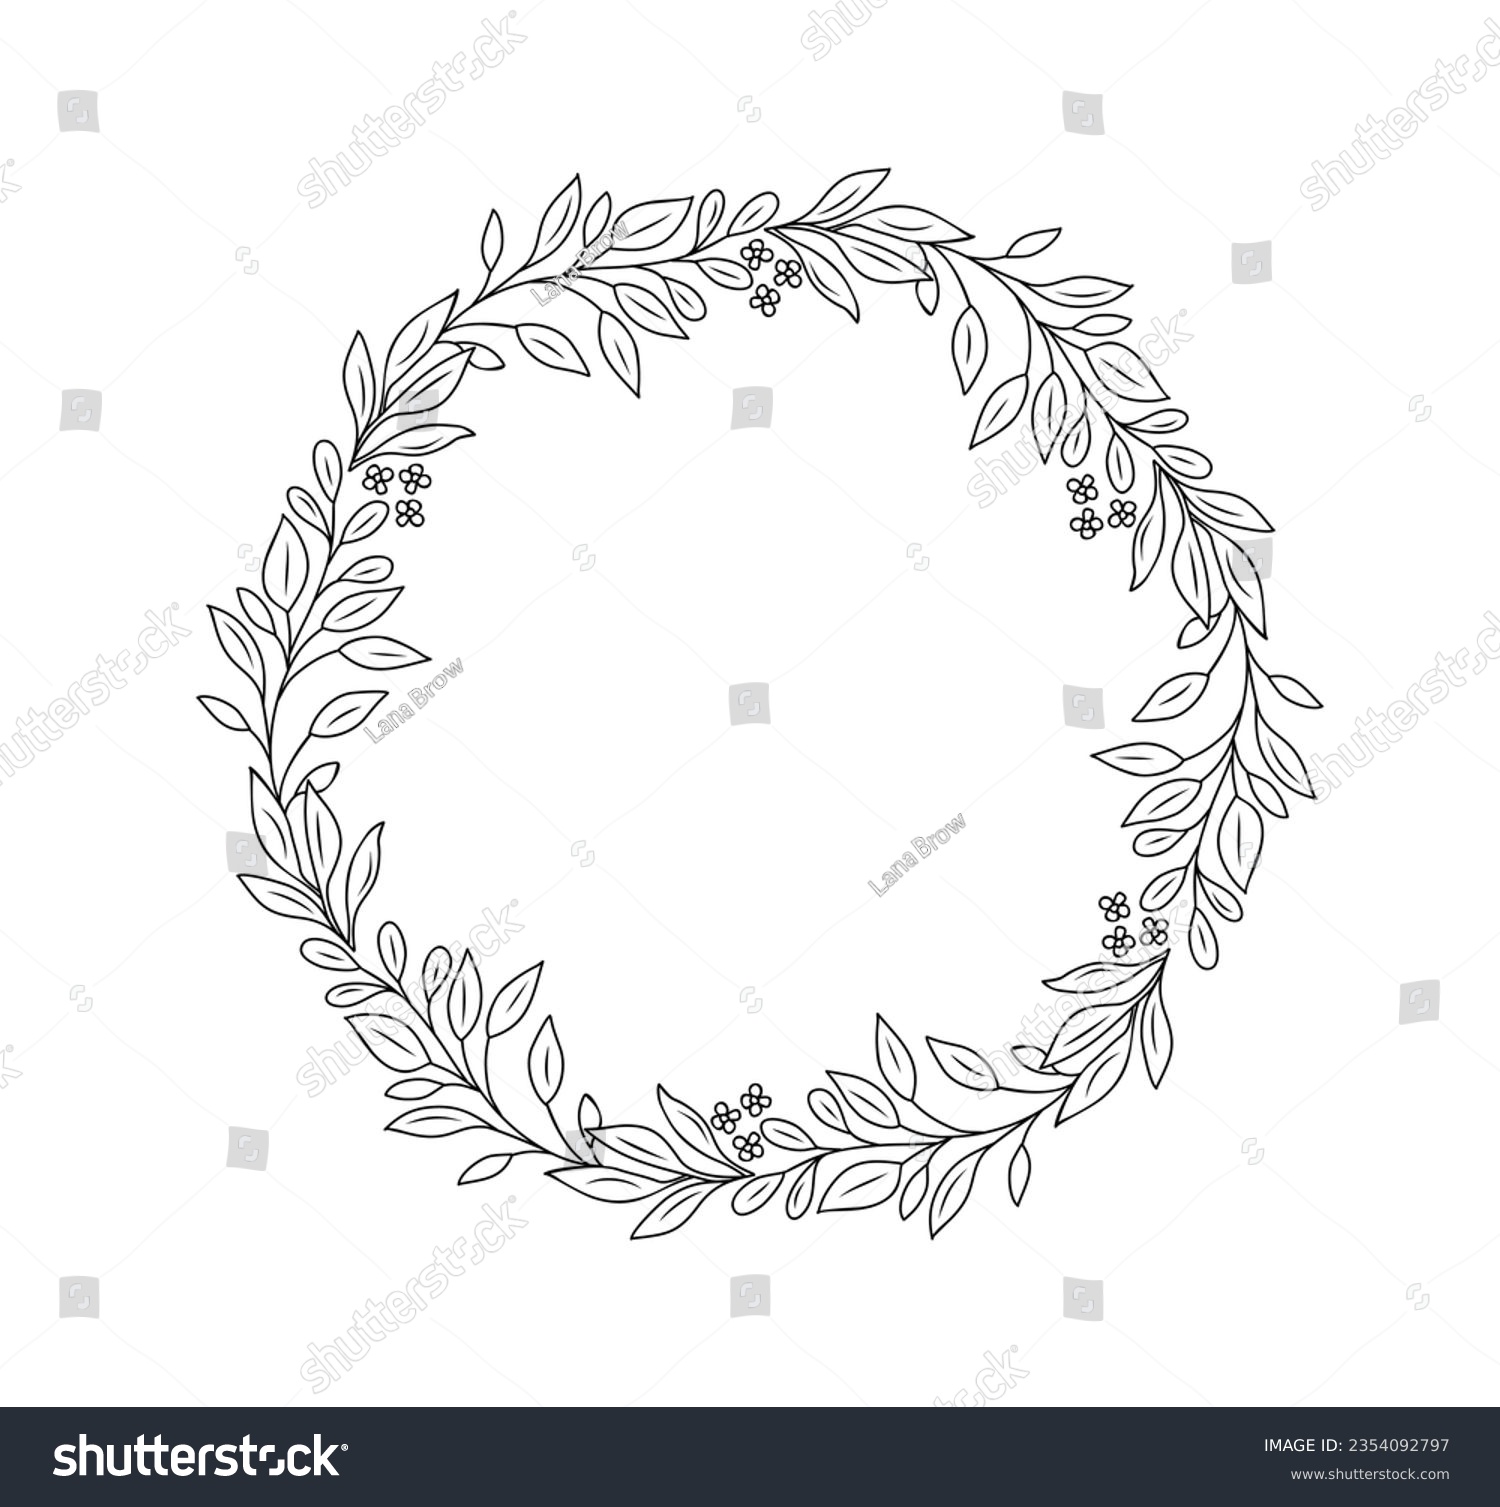 SVG of Hand drawn botanical wreath line art vector illustration isolated on white background. Circle frame with leaves and flowers in black ink sketch style. Elegant decorative design element svg